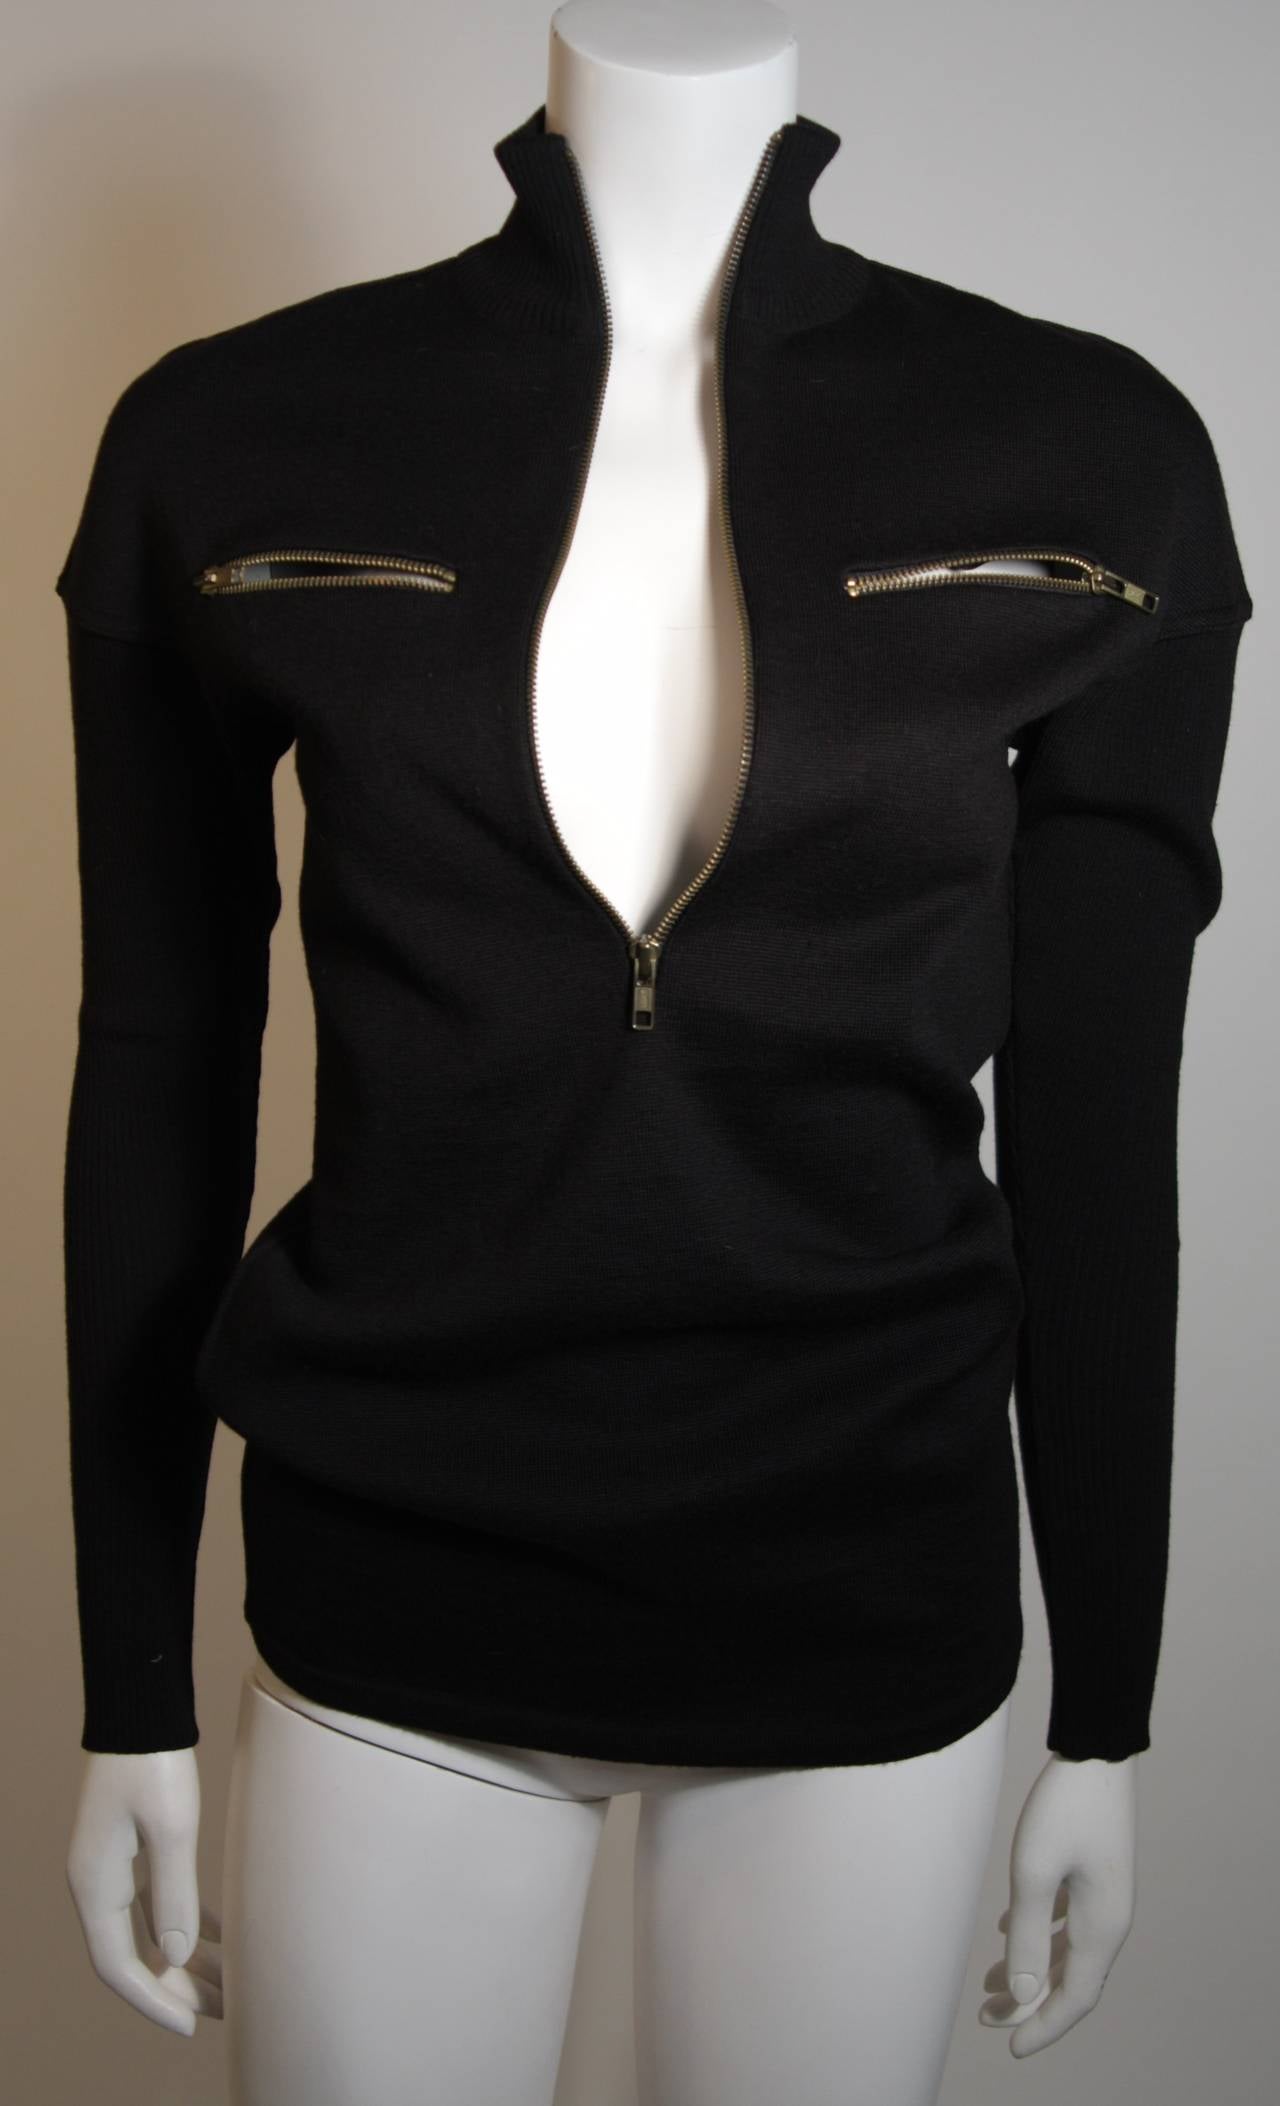 Women's Alaia Black Wool Sweater with Zippers Size XS